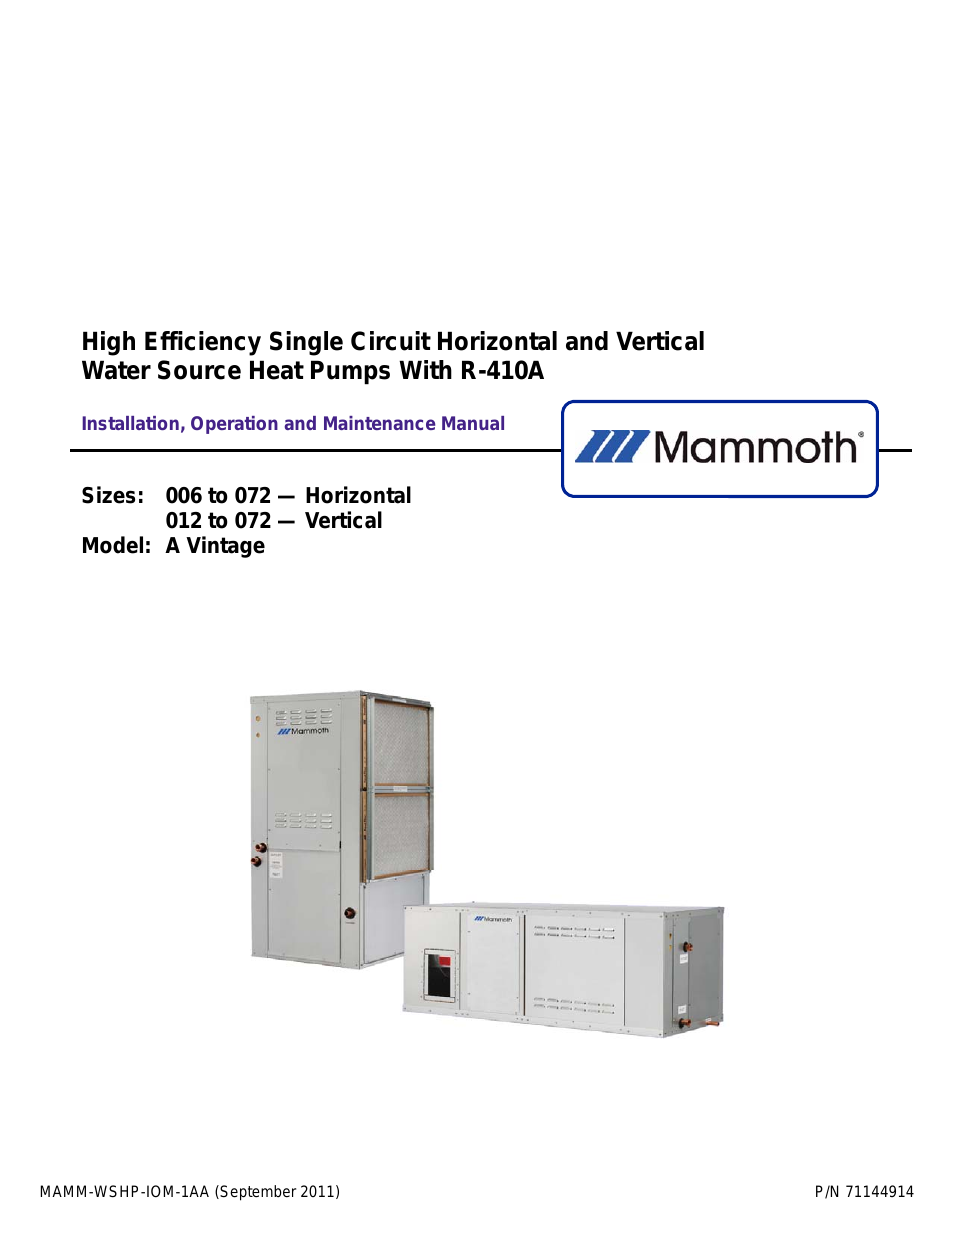 1/2 to 6 Tons: High Efficiency Single Circuit Horizontal and Vertical (A-Vintage)